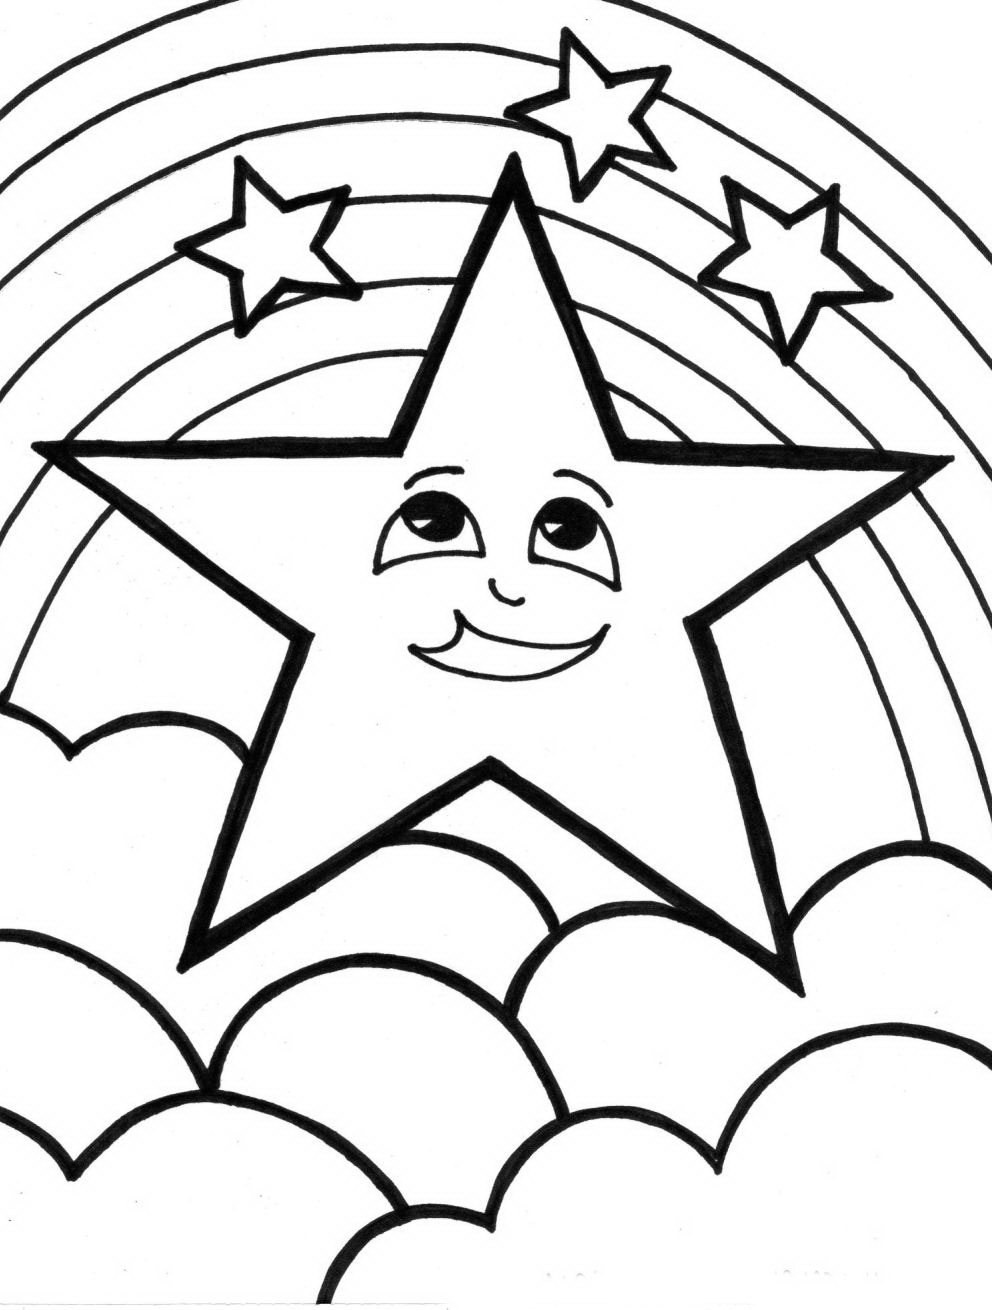 colouring sheet rainbow free printable rainbow coloring pages for kids cool2bkids sheet colouring rainbow 